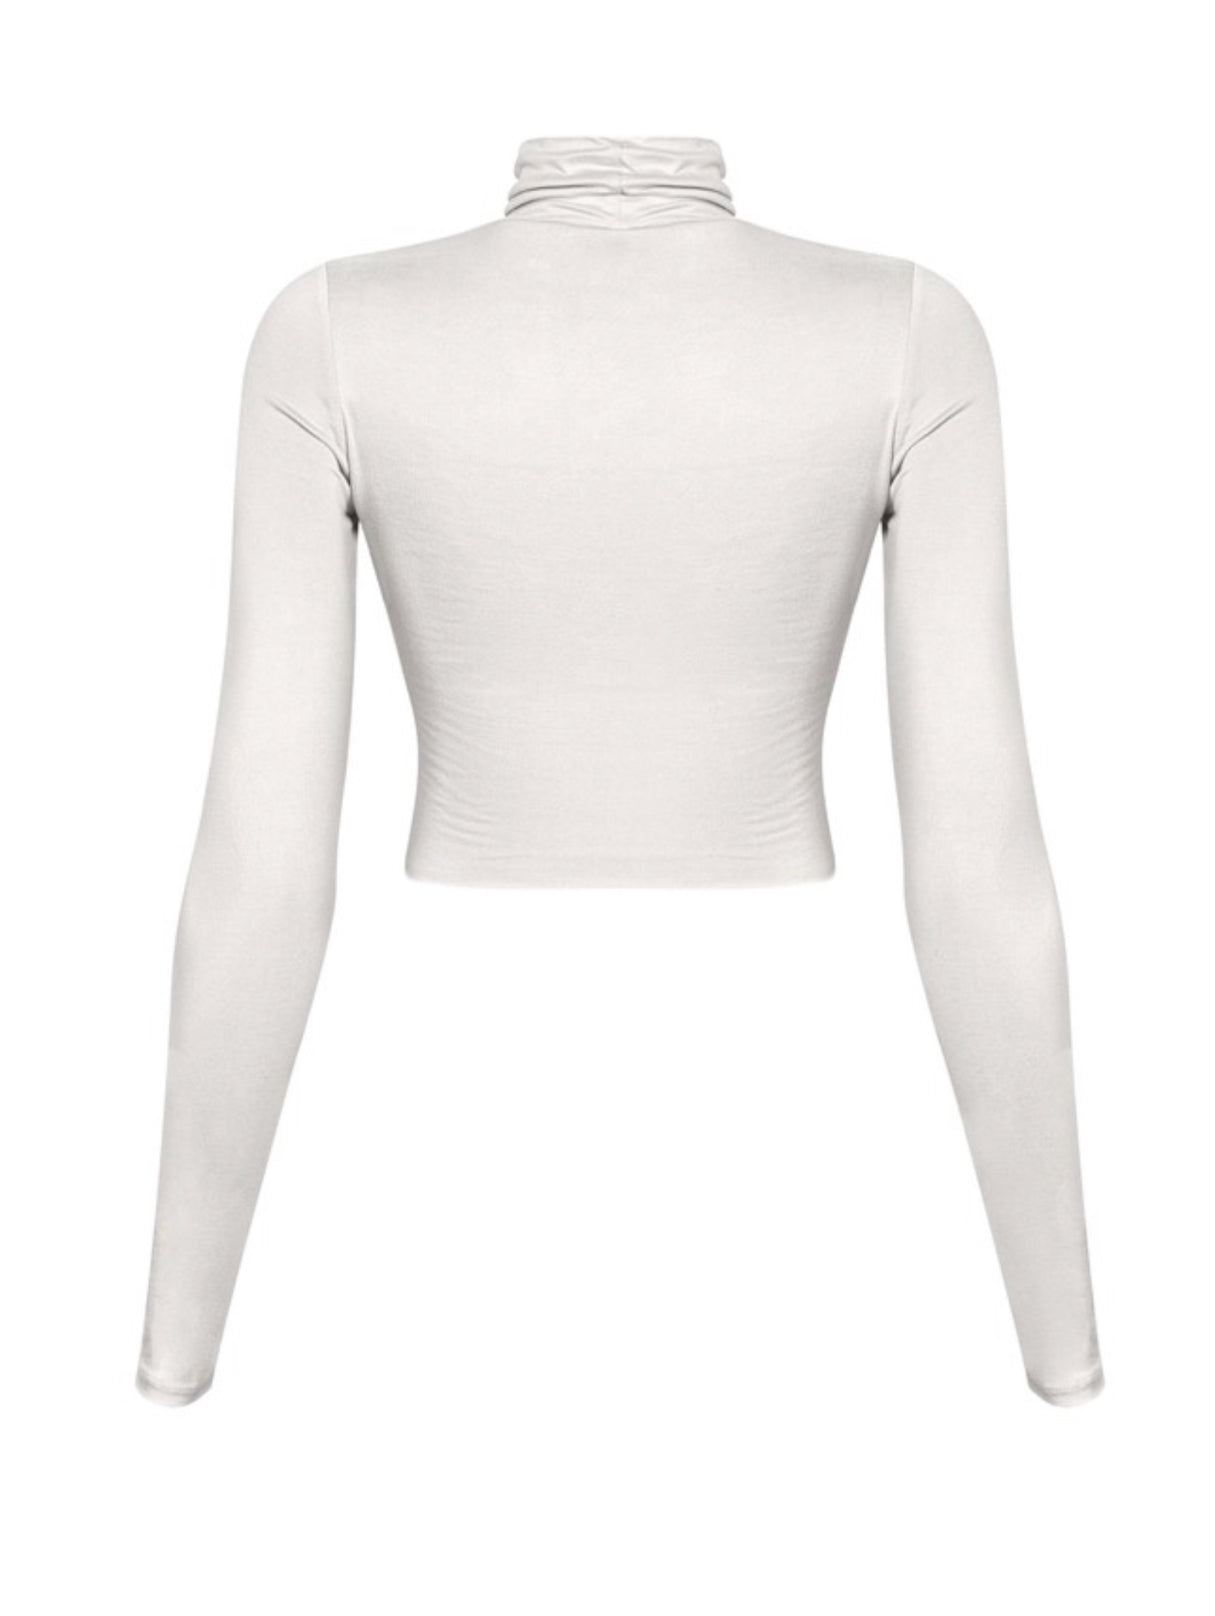 Rese Top - White